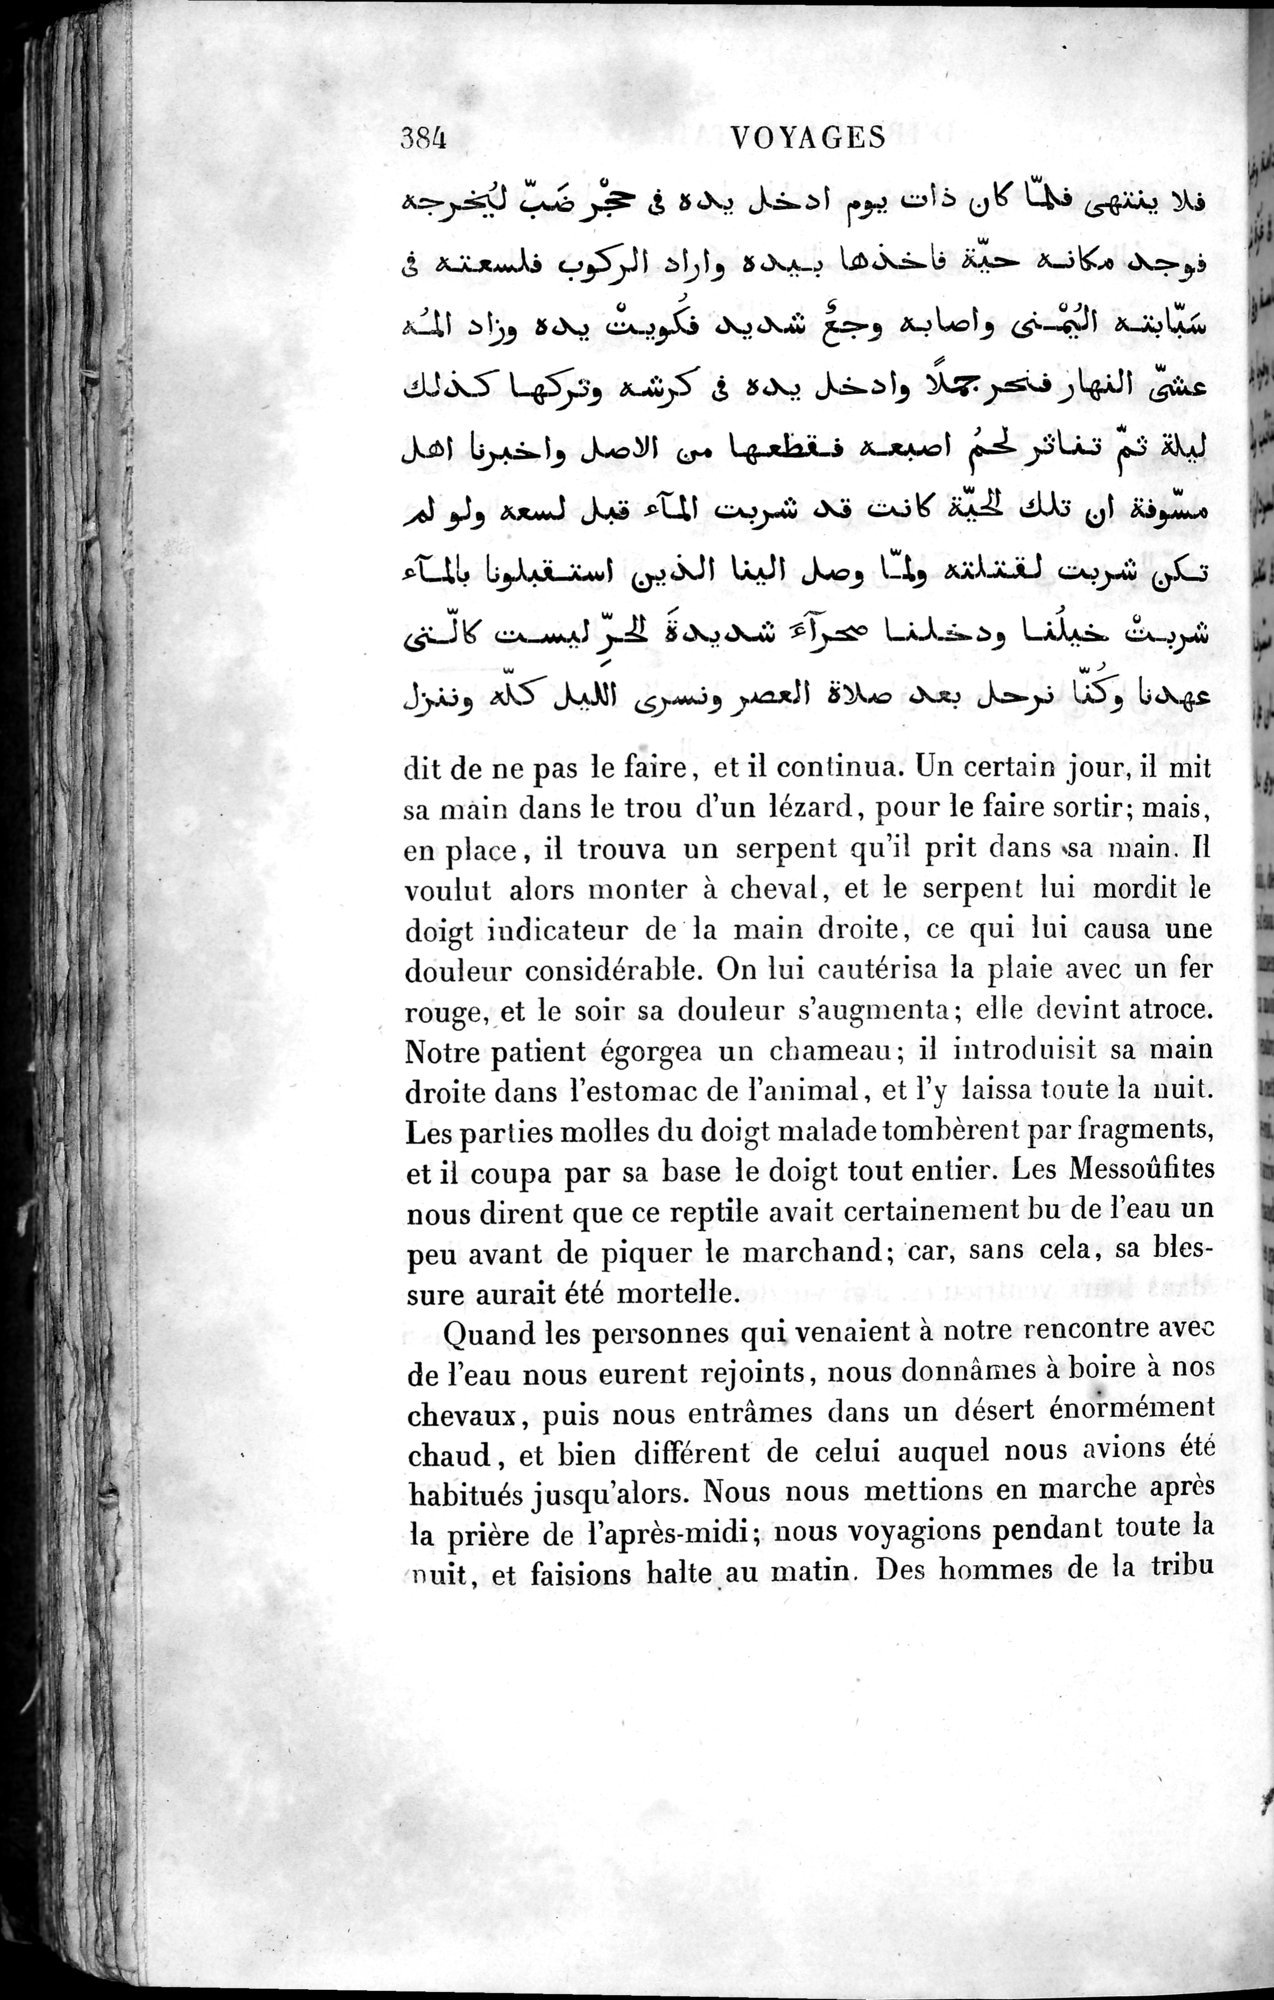 Voyages d'Ibn Batoutah : vol.4 / Page 396 (Grayscale High Resolution Image)